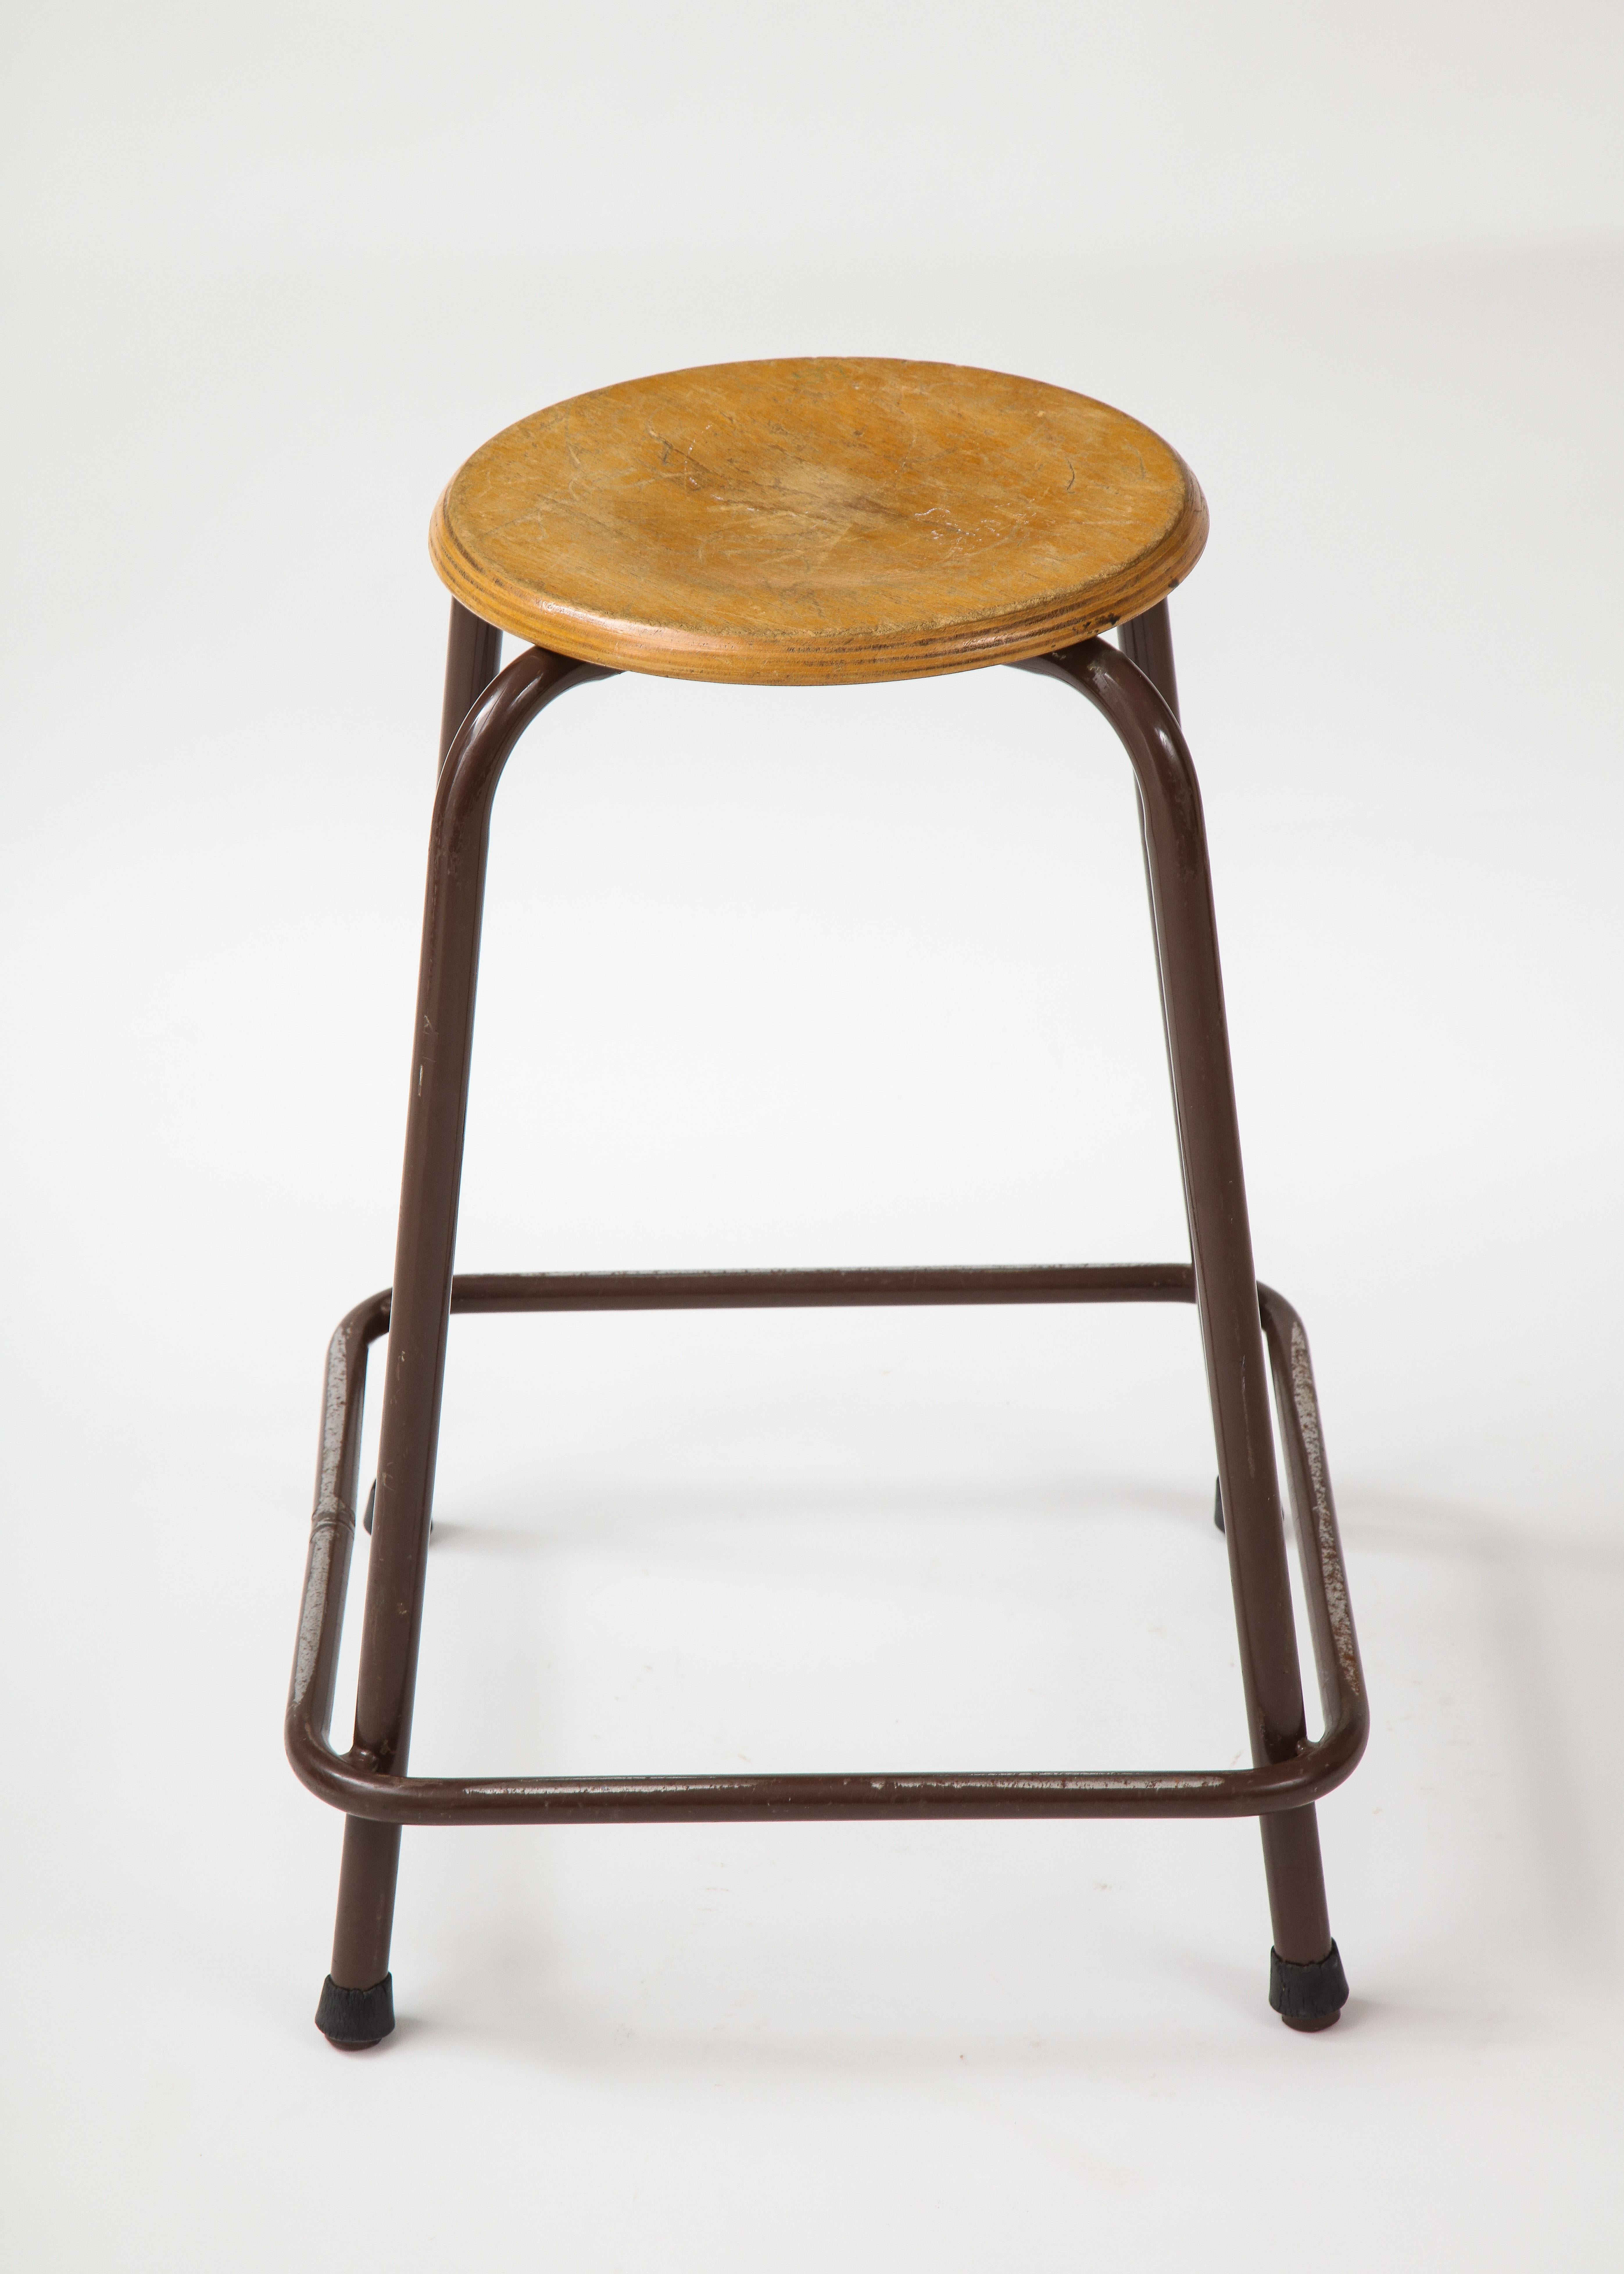 French stool with a wood seat & metal base, c. 1950.